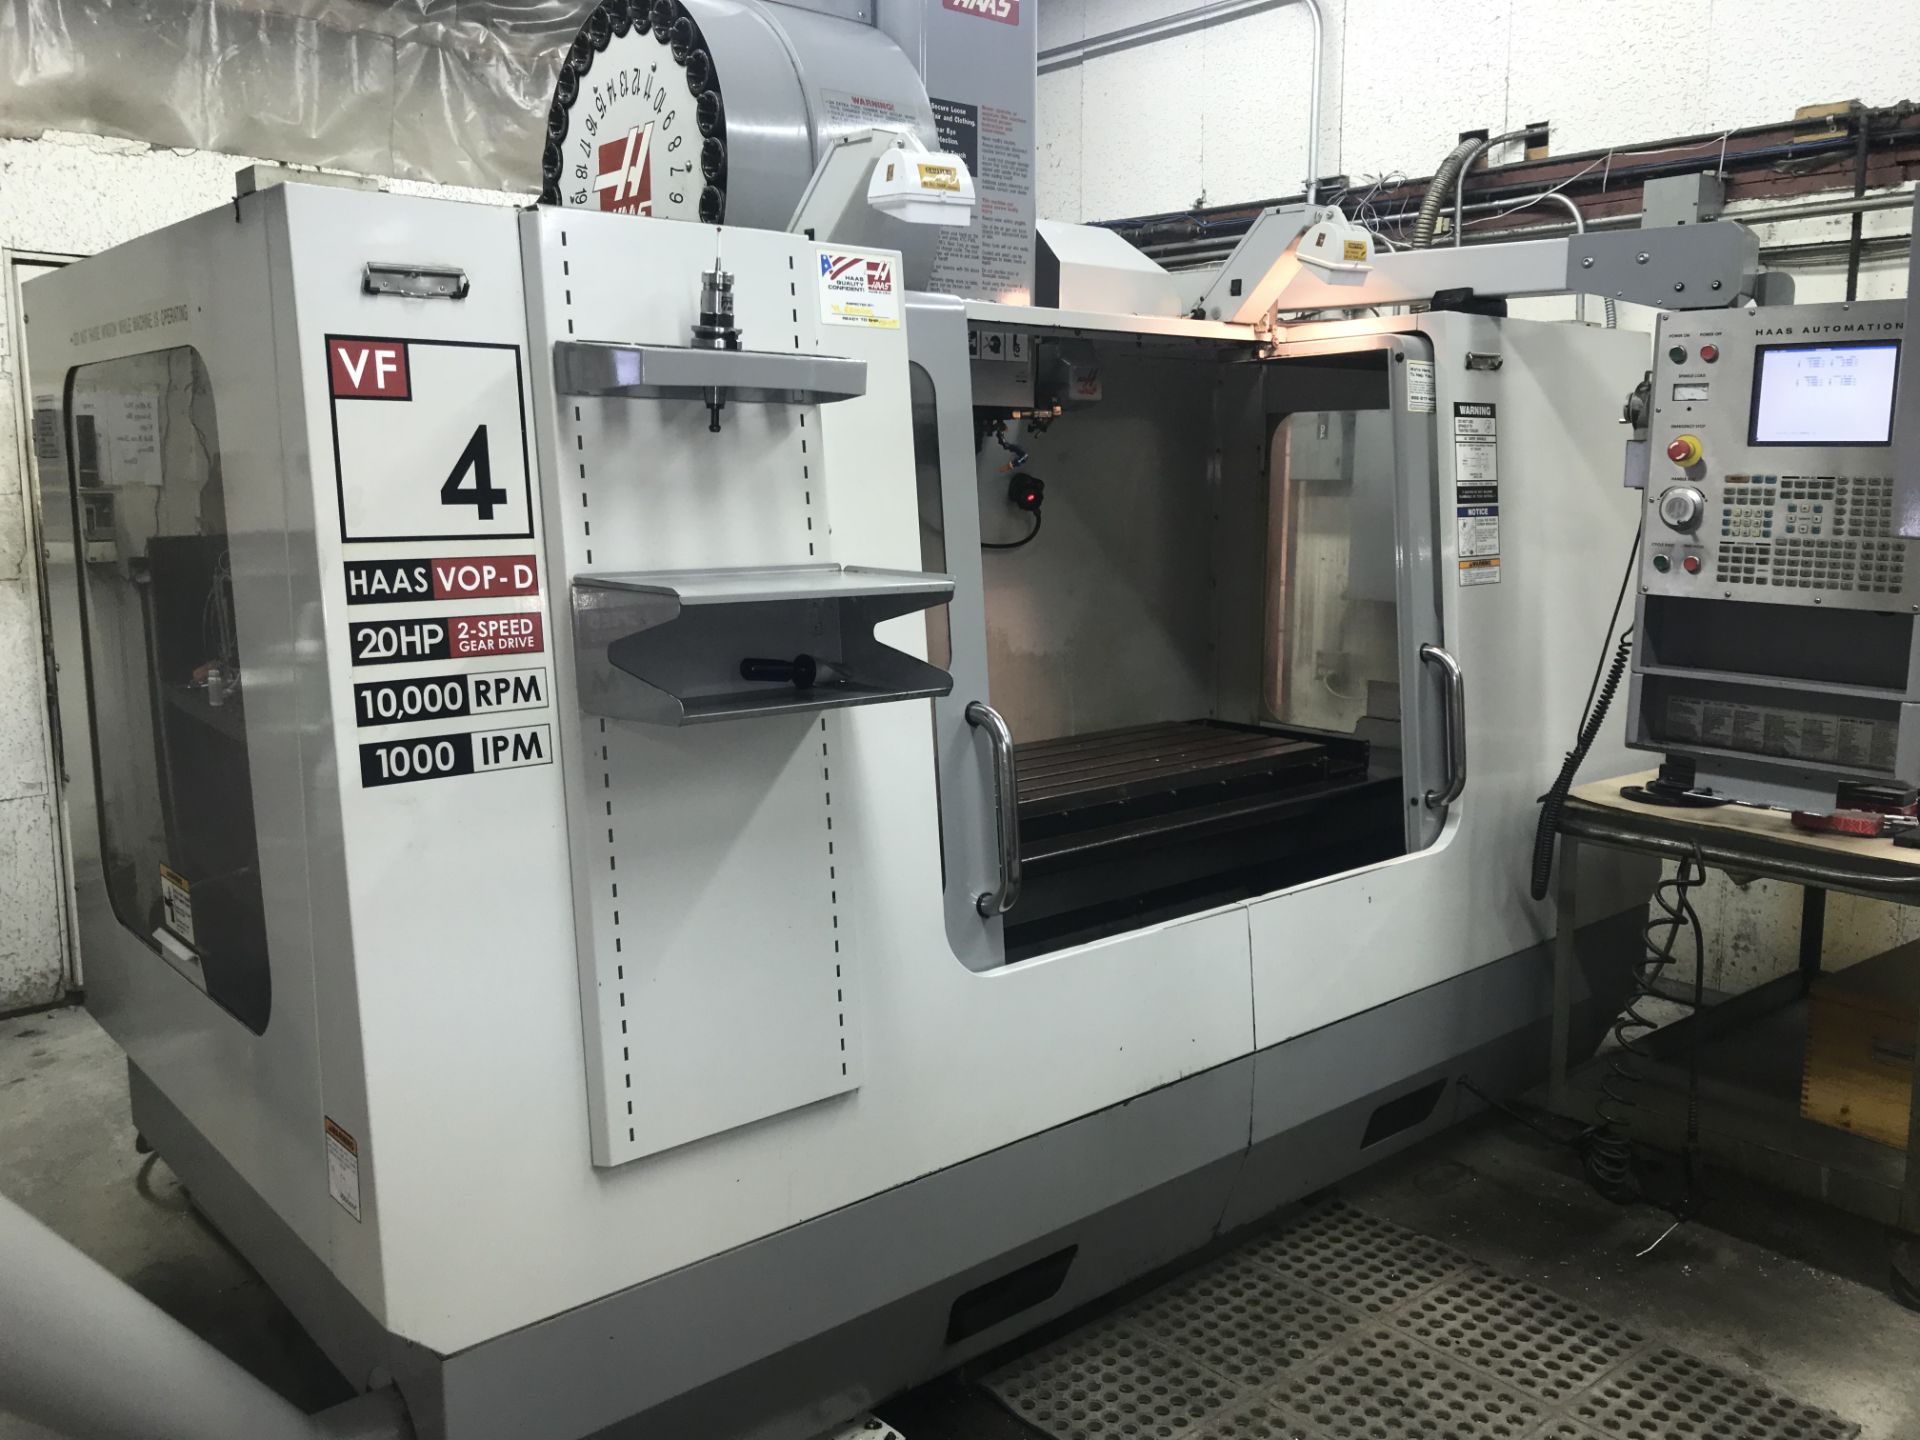 2005 HAAS VF-4B, 20 HP, 10K SPINDLE, 1000 IPM RAPID 24 TOOL SMTC, 4TH AXIS READY, WIPS, CHIP